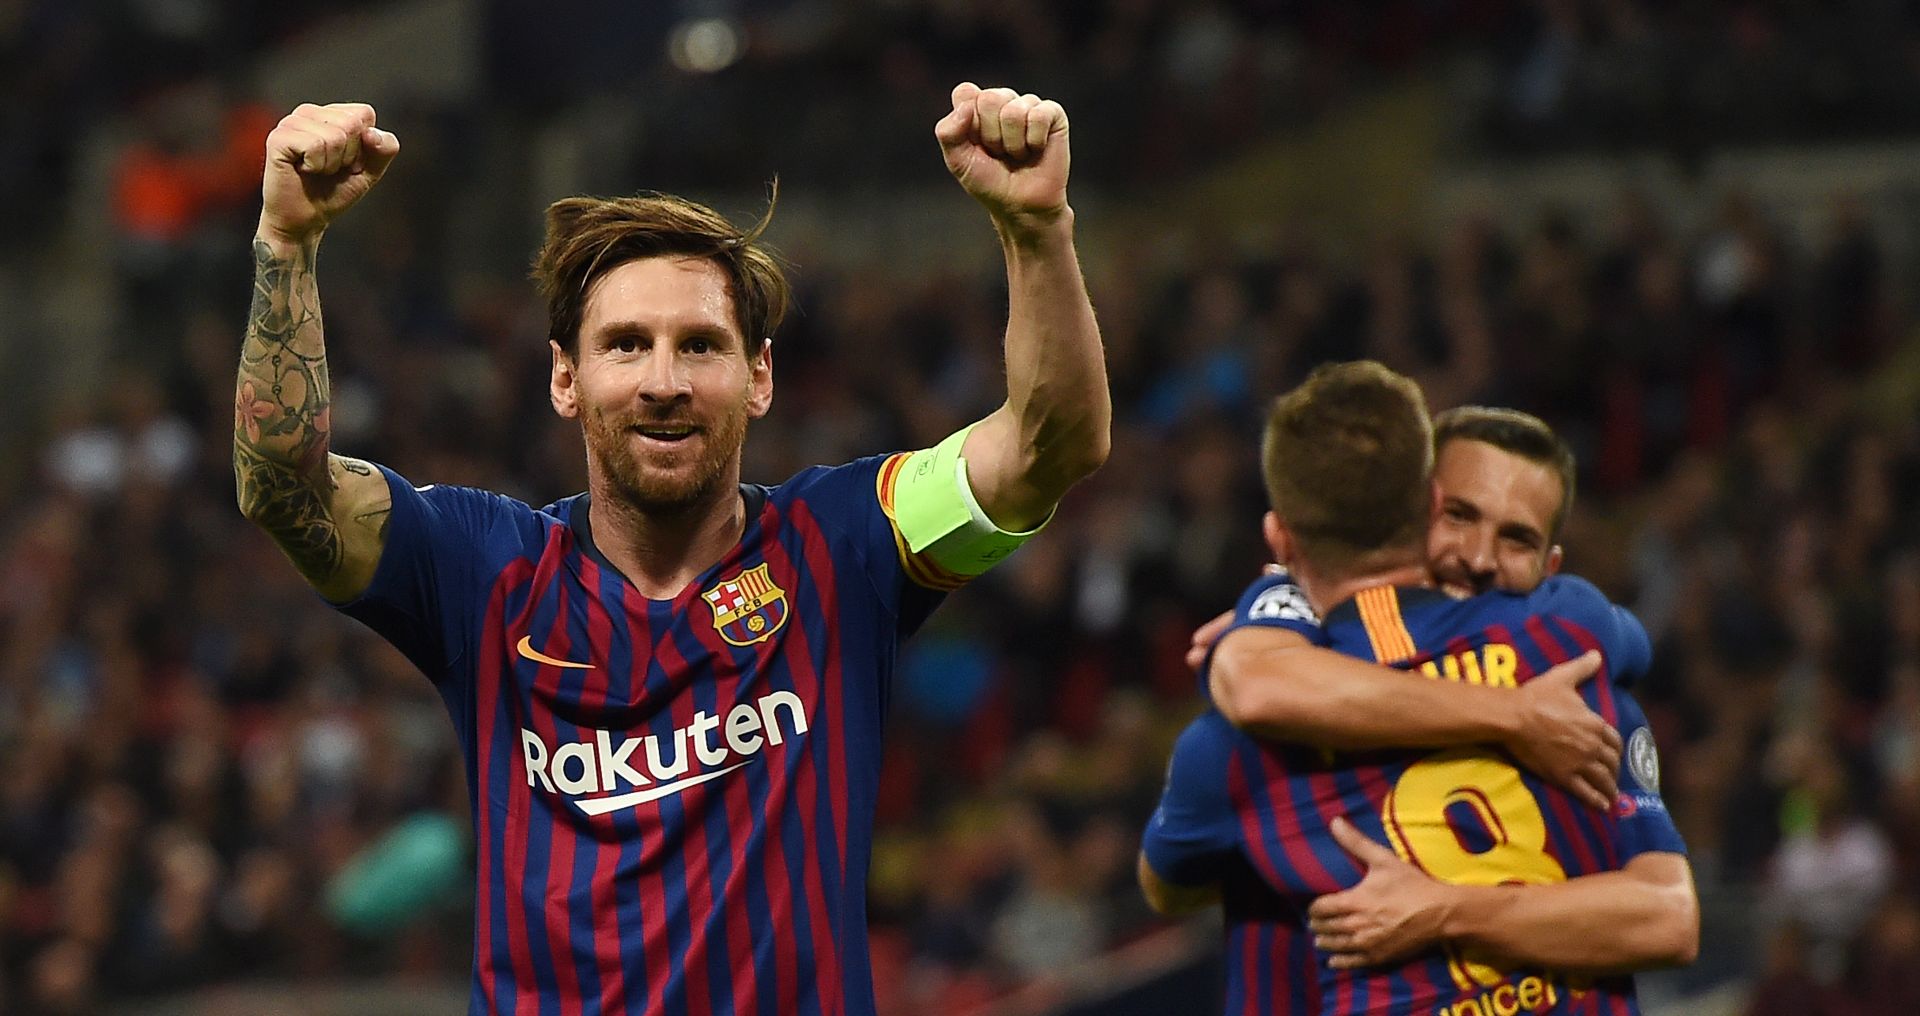 epa07067473 Barcelona's Lionel Messi (L) celebrates after scoring his team's third goal during the UEFA Champions League group B soccer match between Tottenham Hotspur and FC Barcelona, London, Britain, 03 October 2018.  EPA/ANDY RAIN